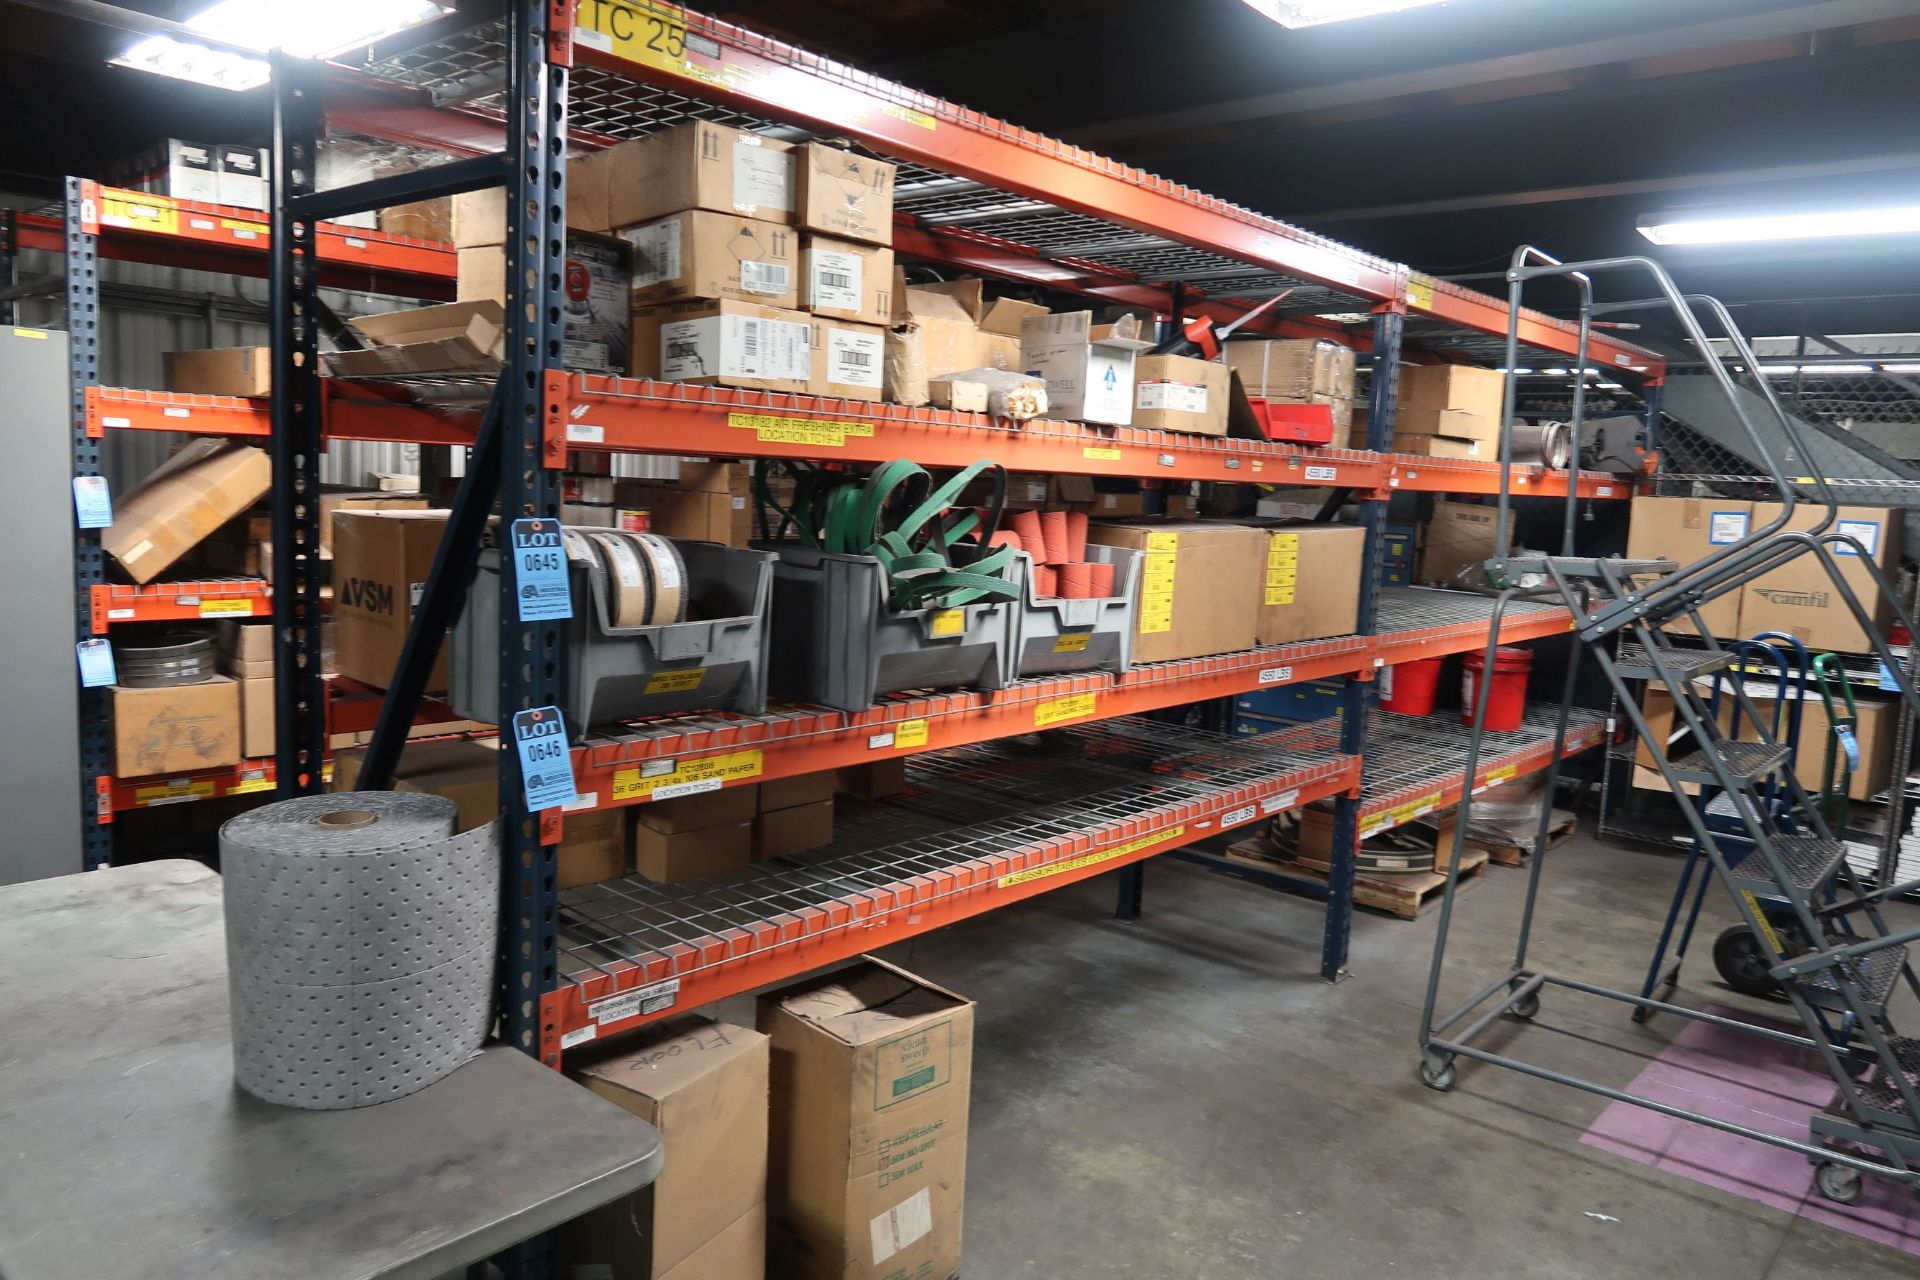 SECTIONS 36" X 120" X 8' PALLET RACK WITH DECKING **LOADING PRICE DUE TO ERRA - $200.00**